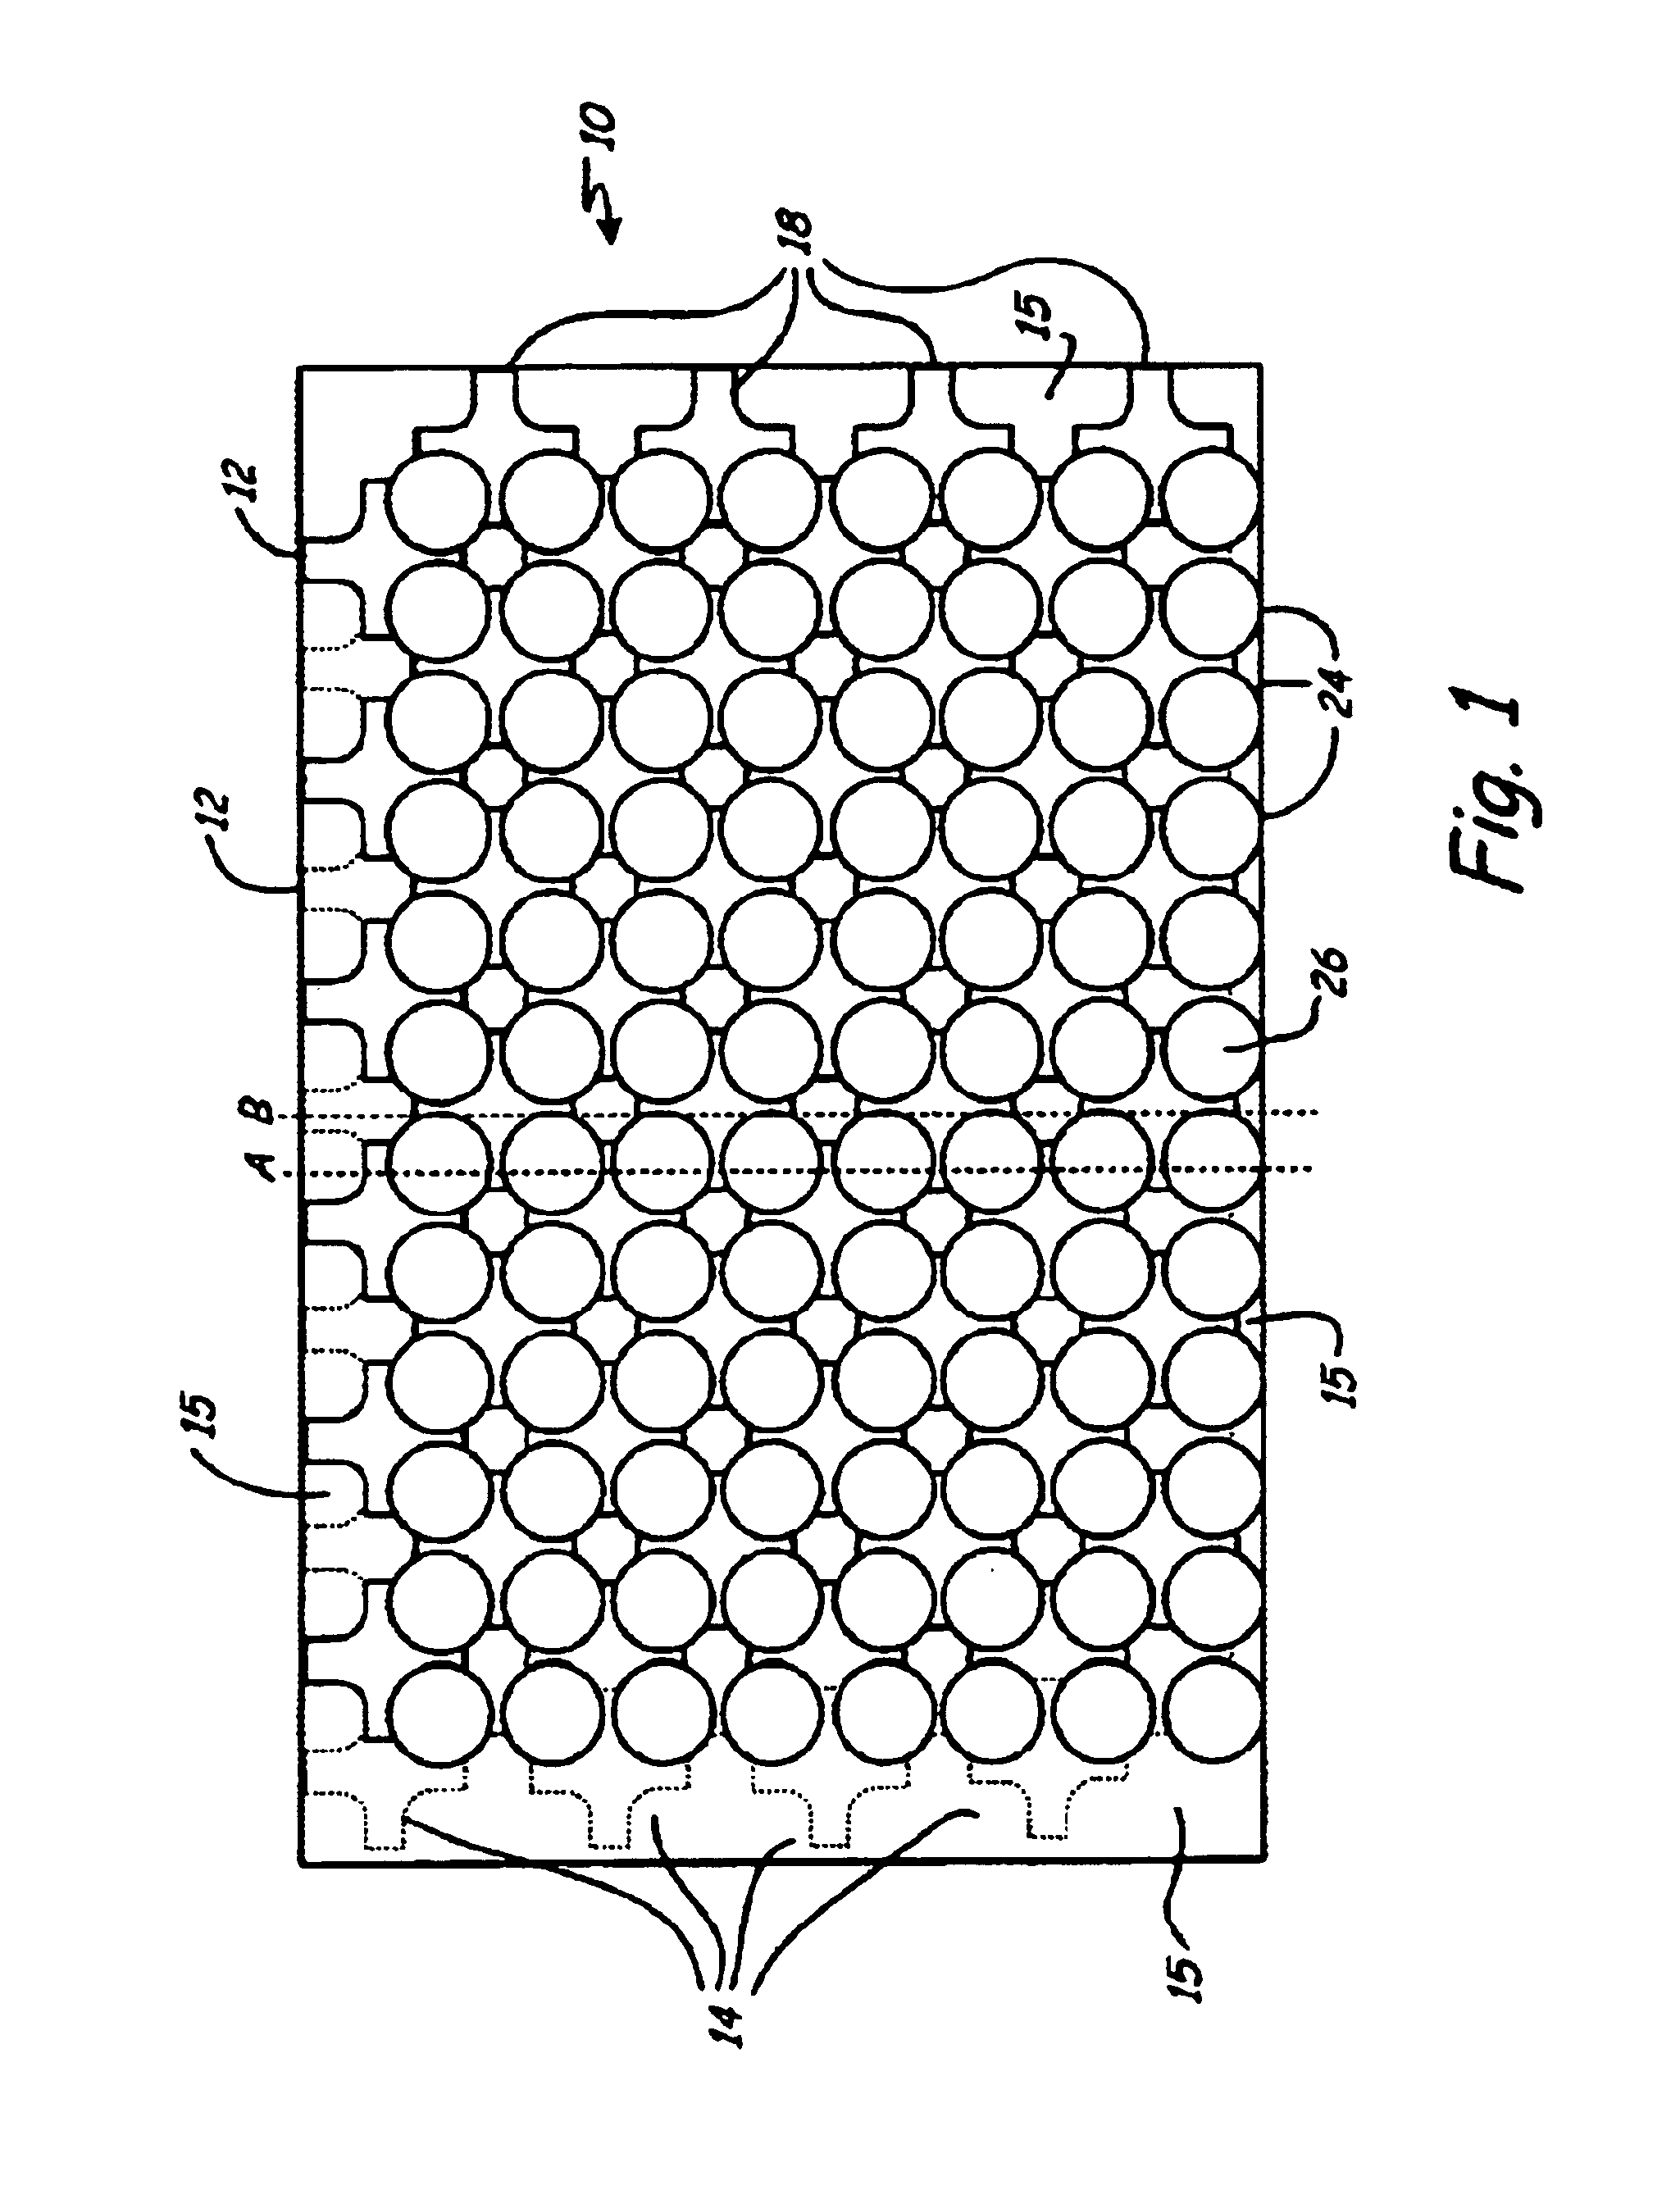 Supple penetration resistant fabric and method of making